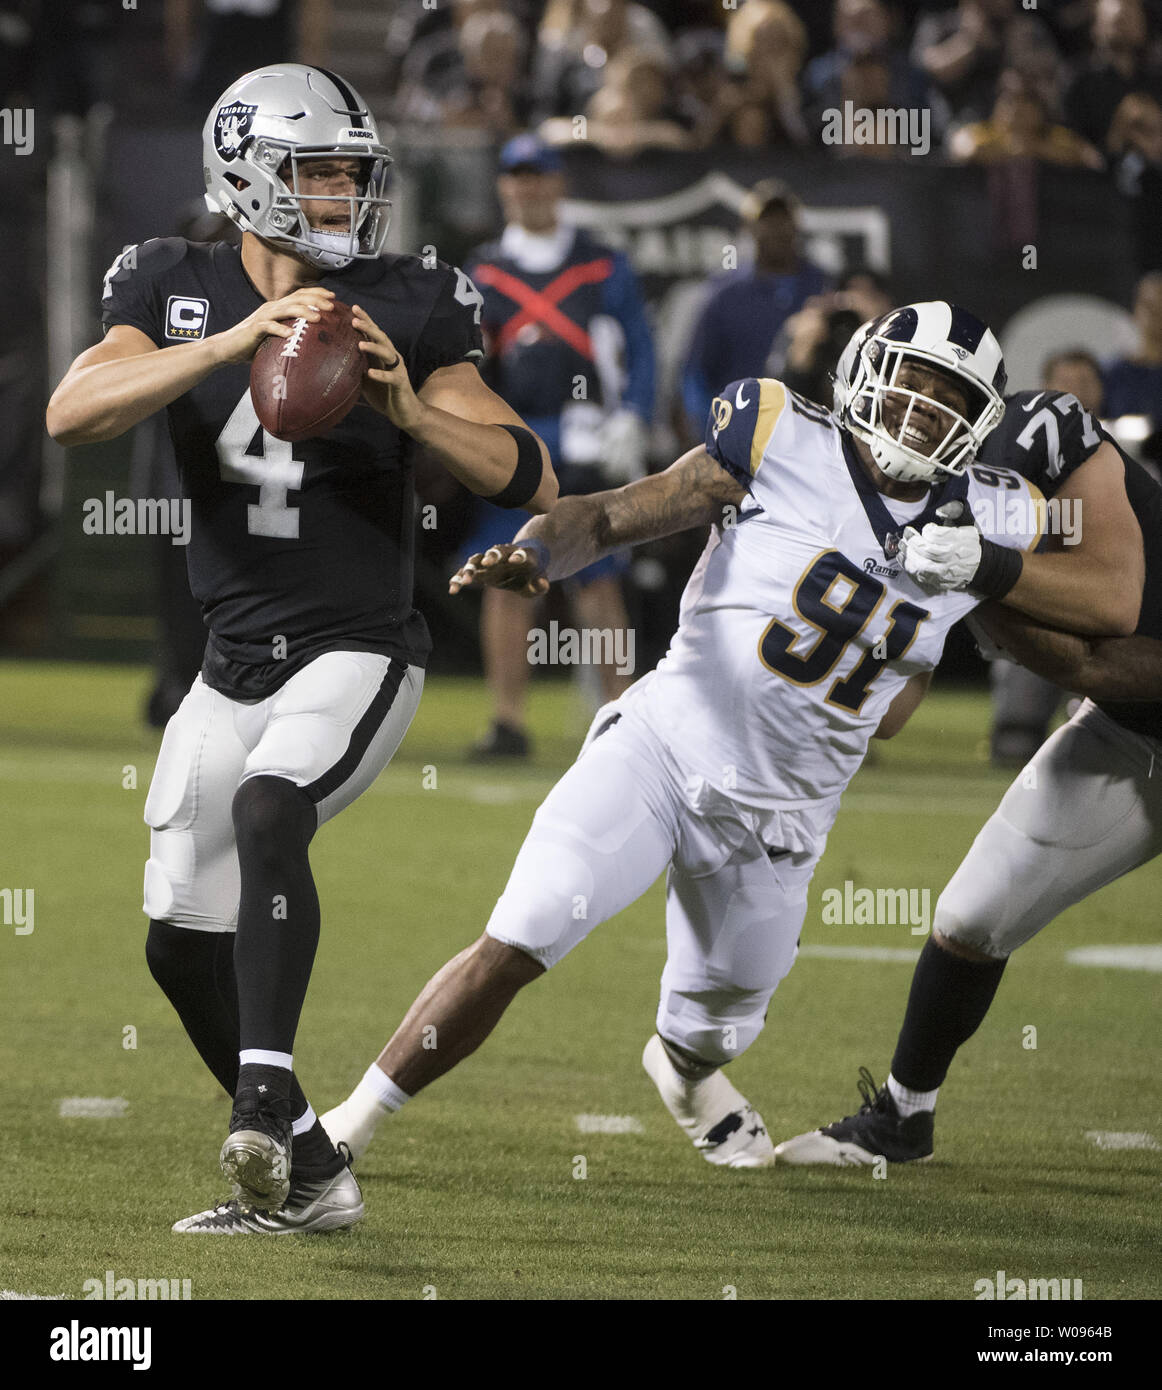 Oakland Raiders QB Derek Carr (4) rolls out to pass against the Los Angeles Rams in the first quarter at the Coliseum in Oakland, California on Monday, September 10, 2018. Carr threw three interceptions as the Rams defeated the Raiders 33-13.       Photo by Terry Schmitt/UPI Stock Photo